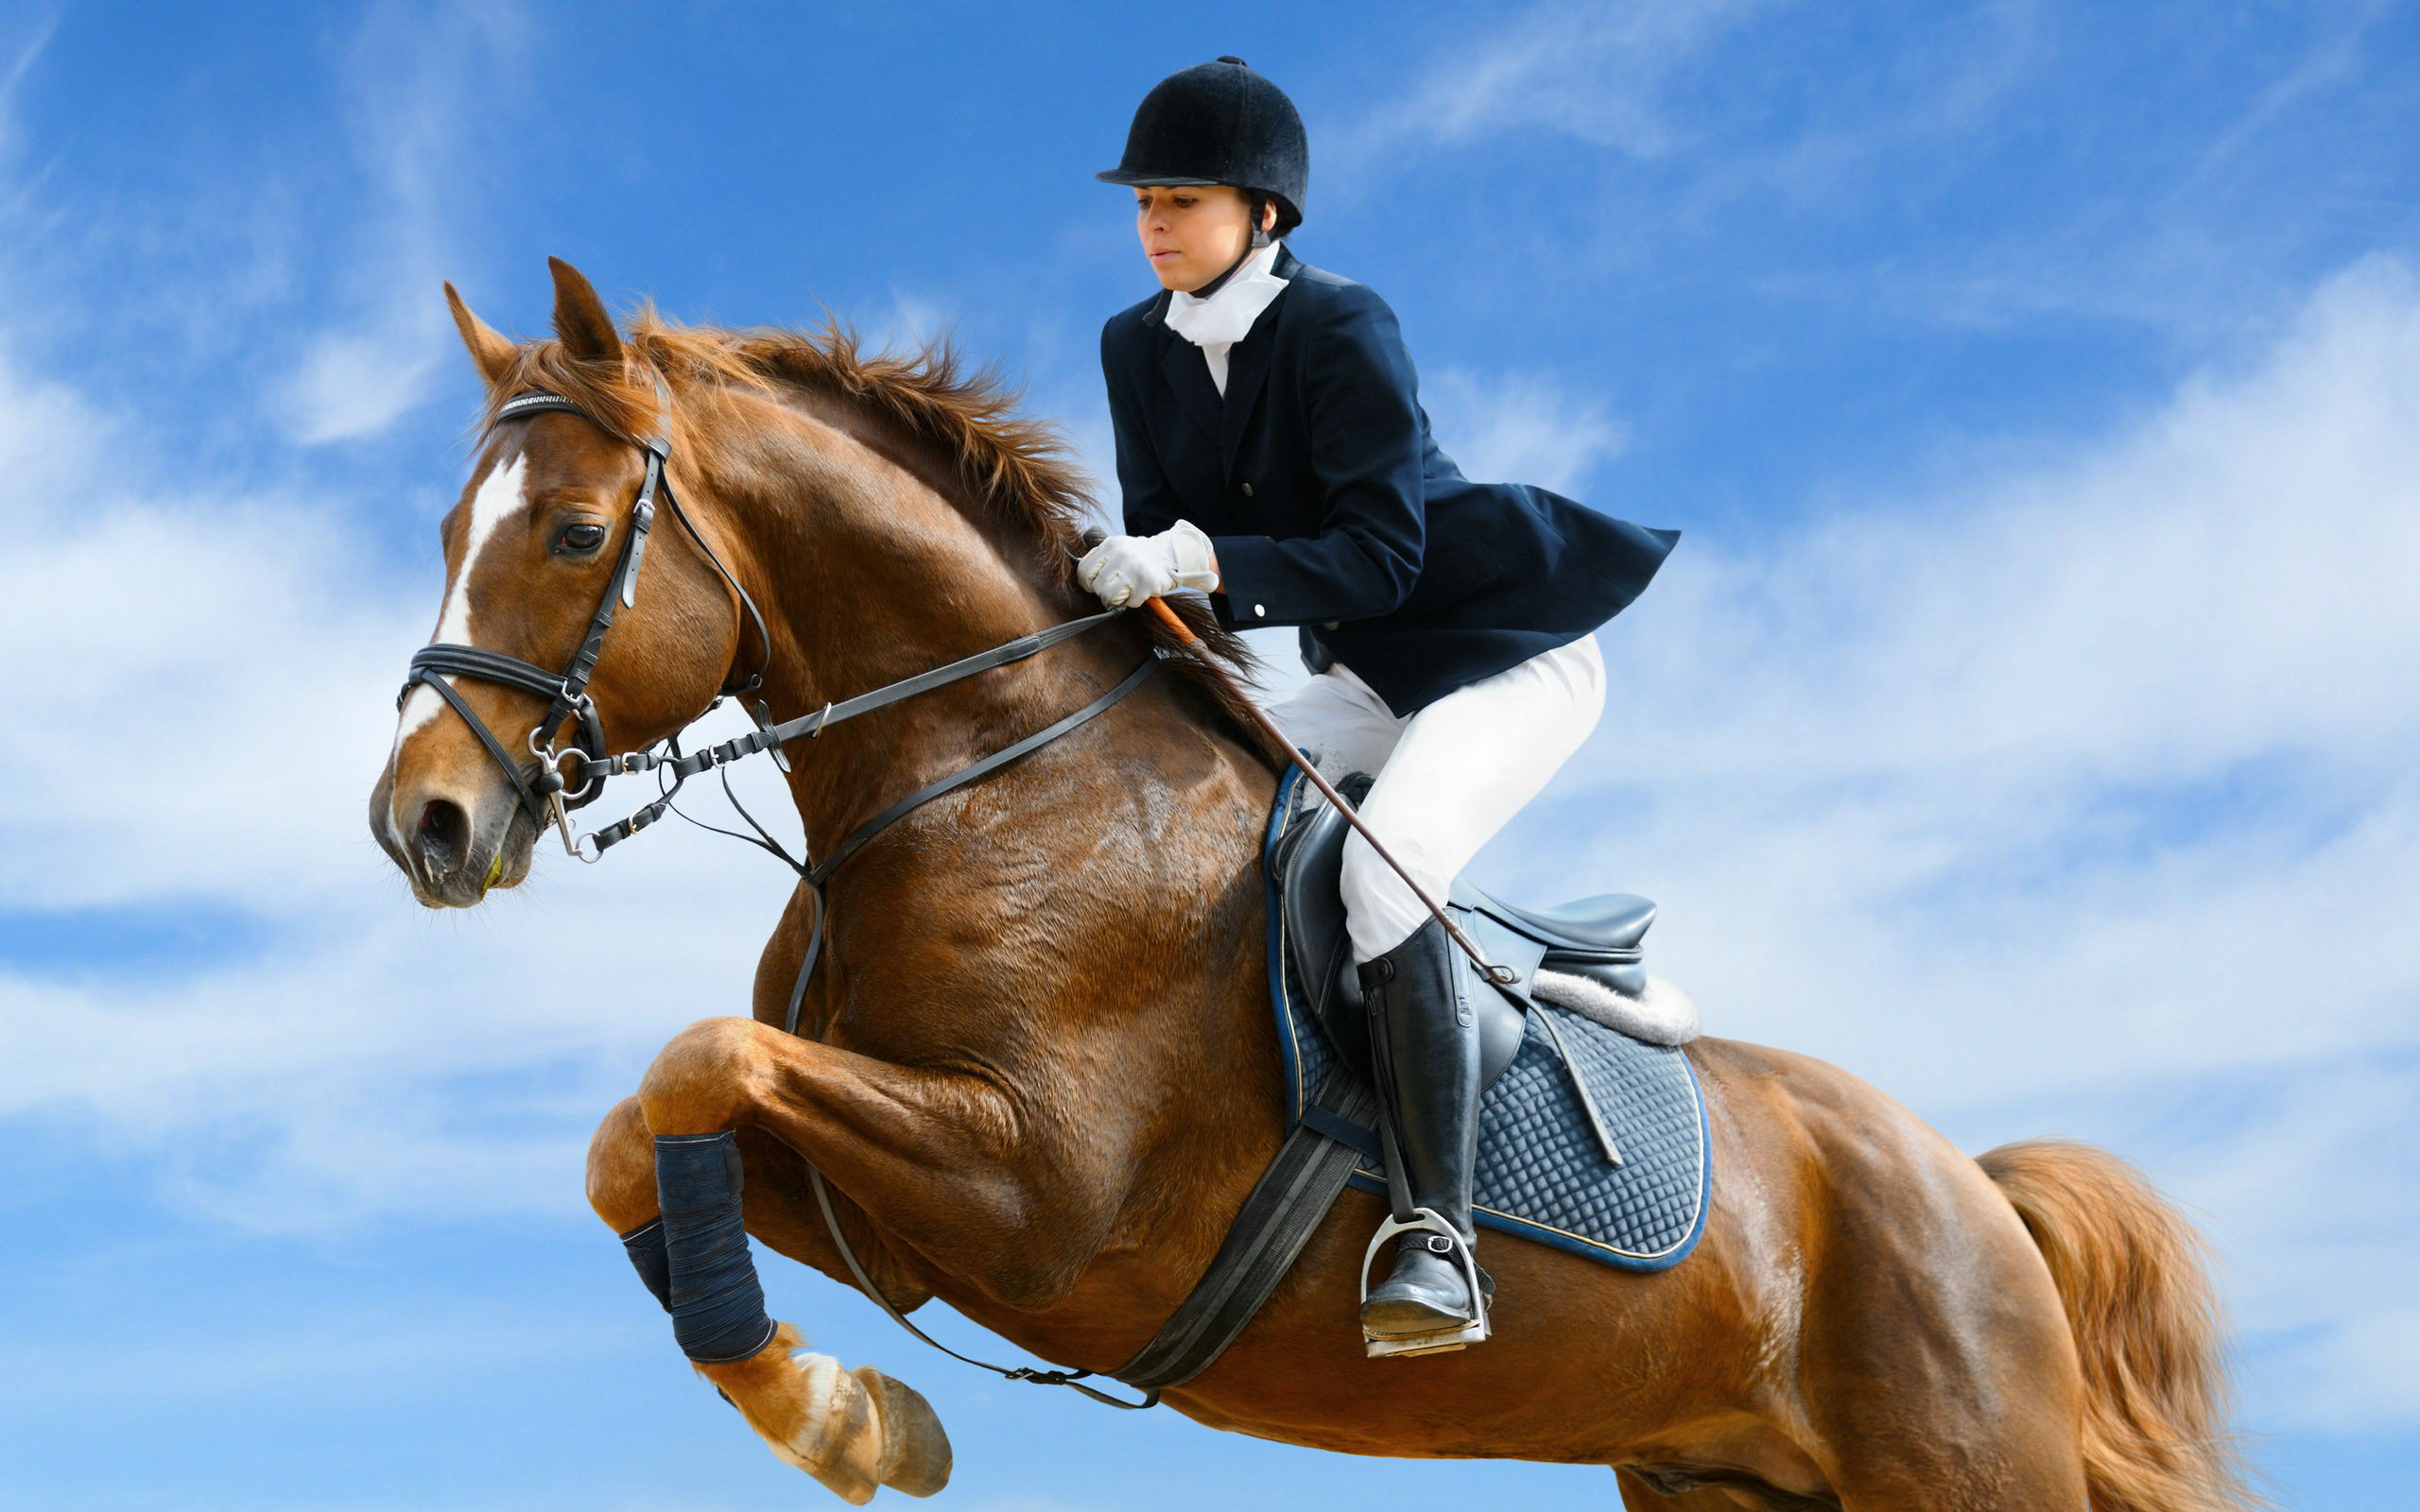 Show Jumping Full HD Wallpaper and Background Image | 2560x1600 | ID:341900